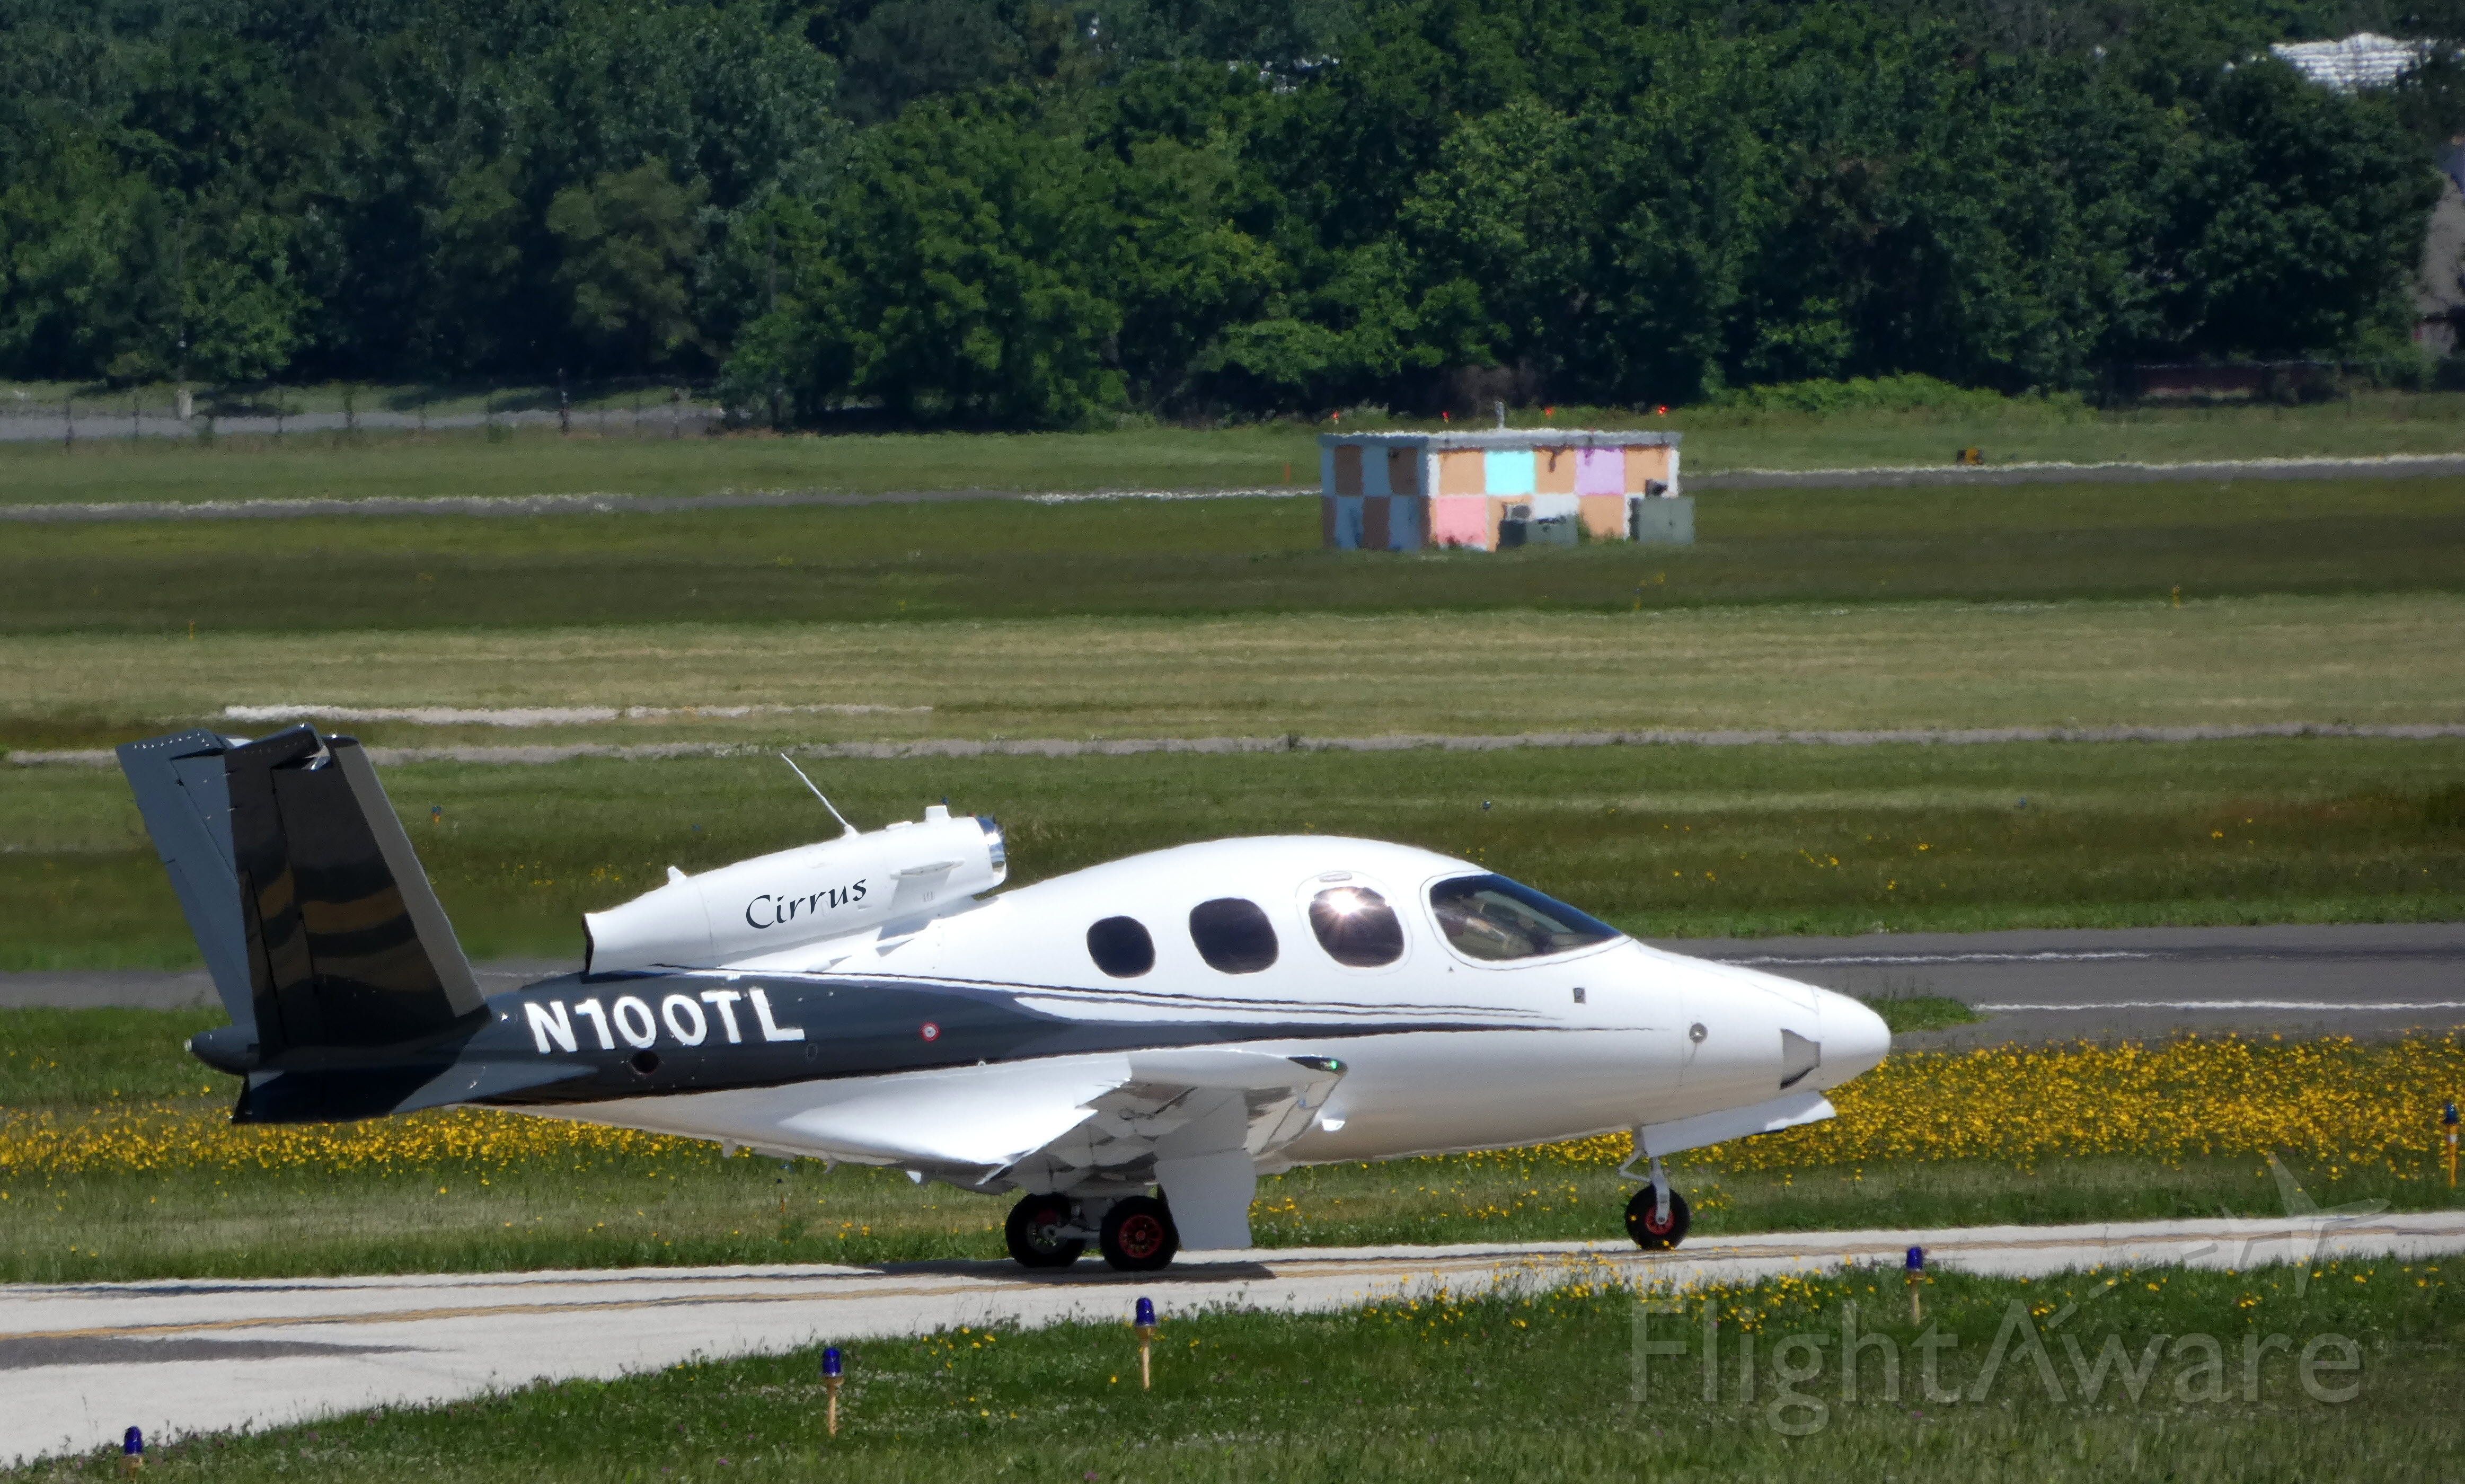 Cirrus Vision SF50 (N100TL) - Taxiing to the active runway is this 2018 Cirrus Vision SF50 in the Spring of 2019.